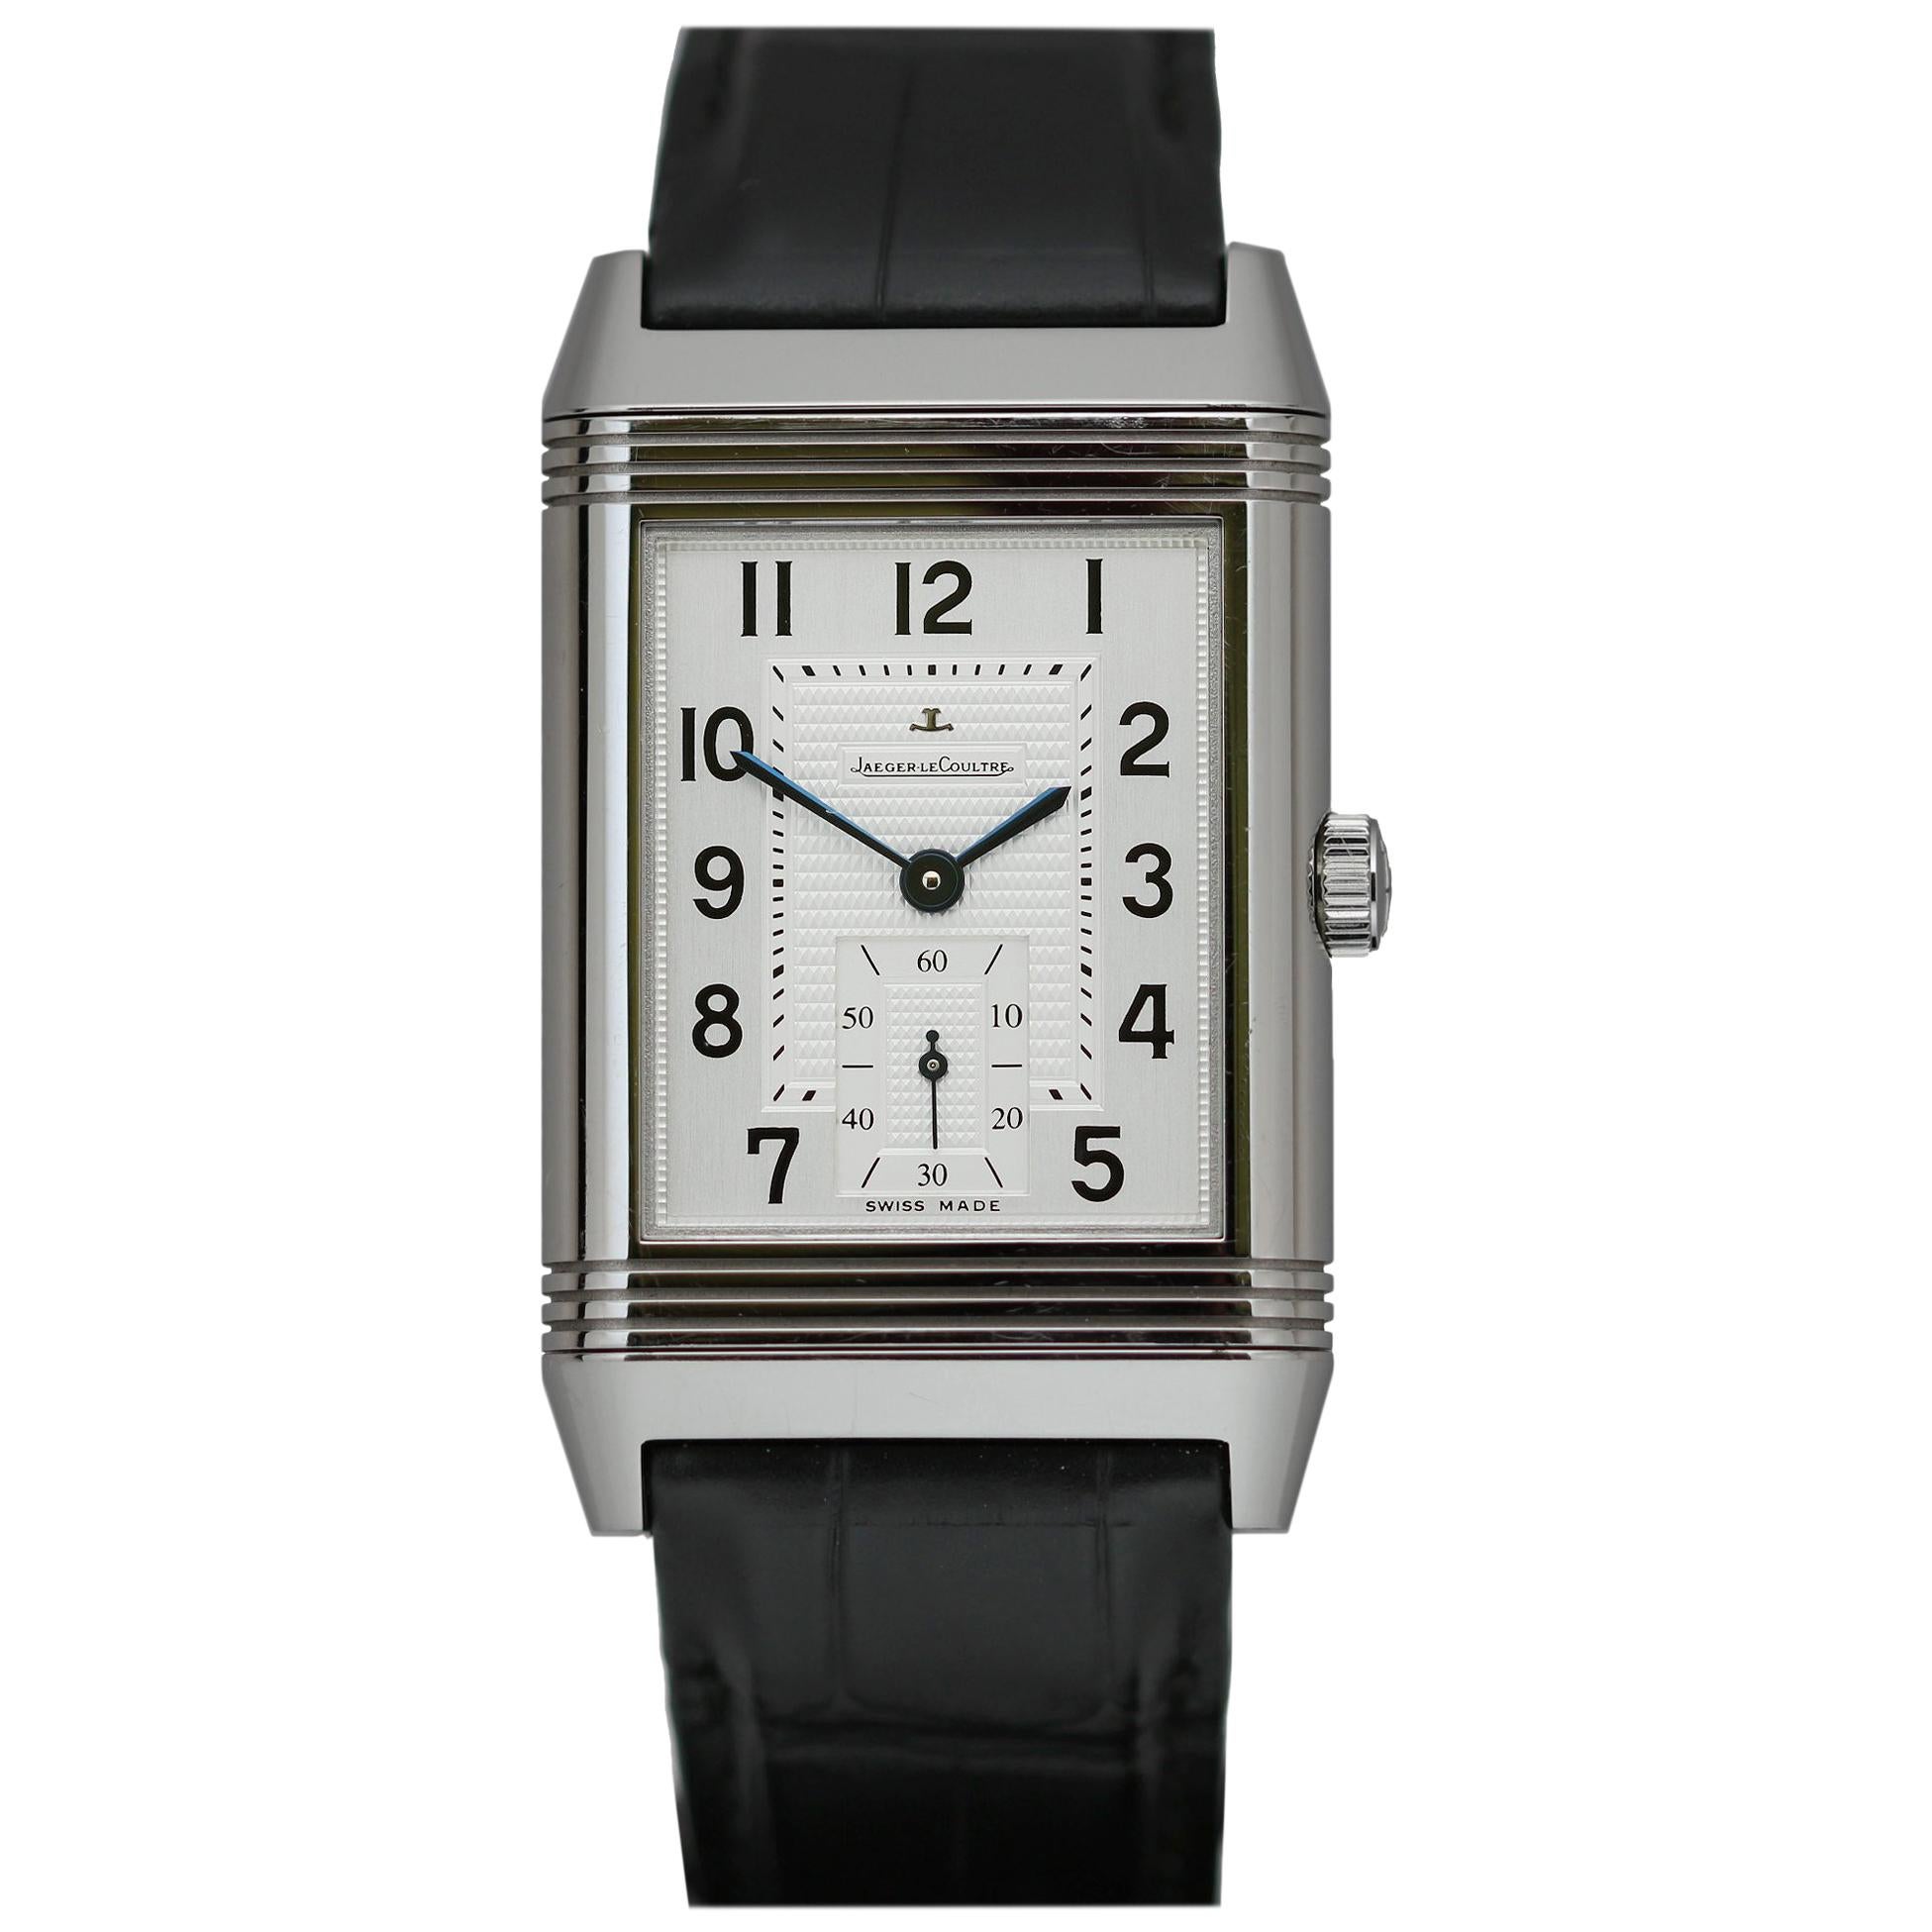 Jaeger-LeCoultre Stainless Steel Grand Reverso 976 with Box & Papers c. 2010